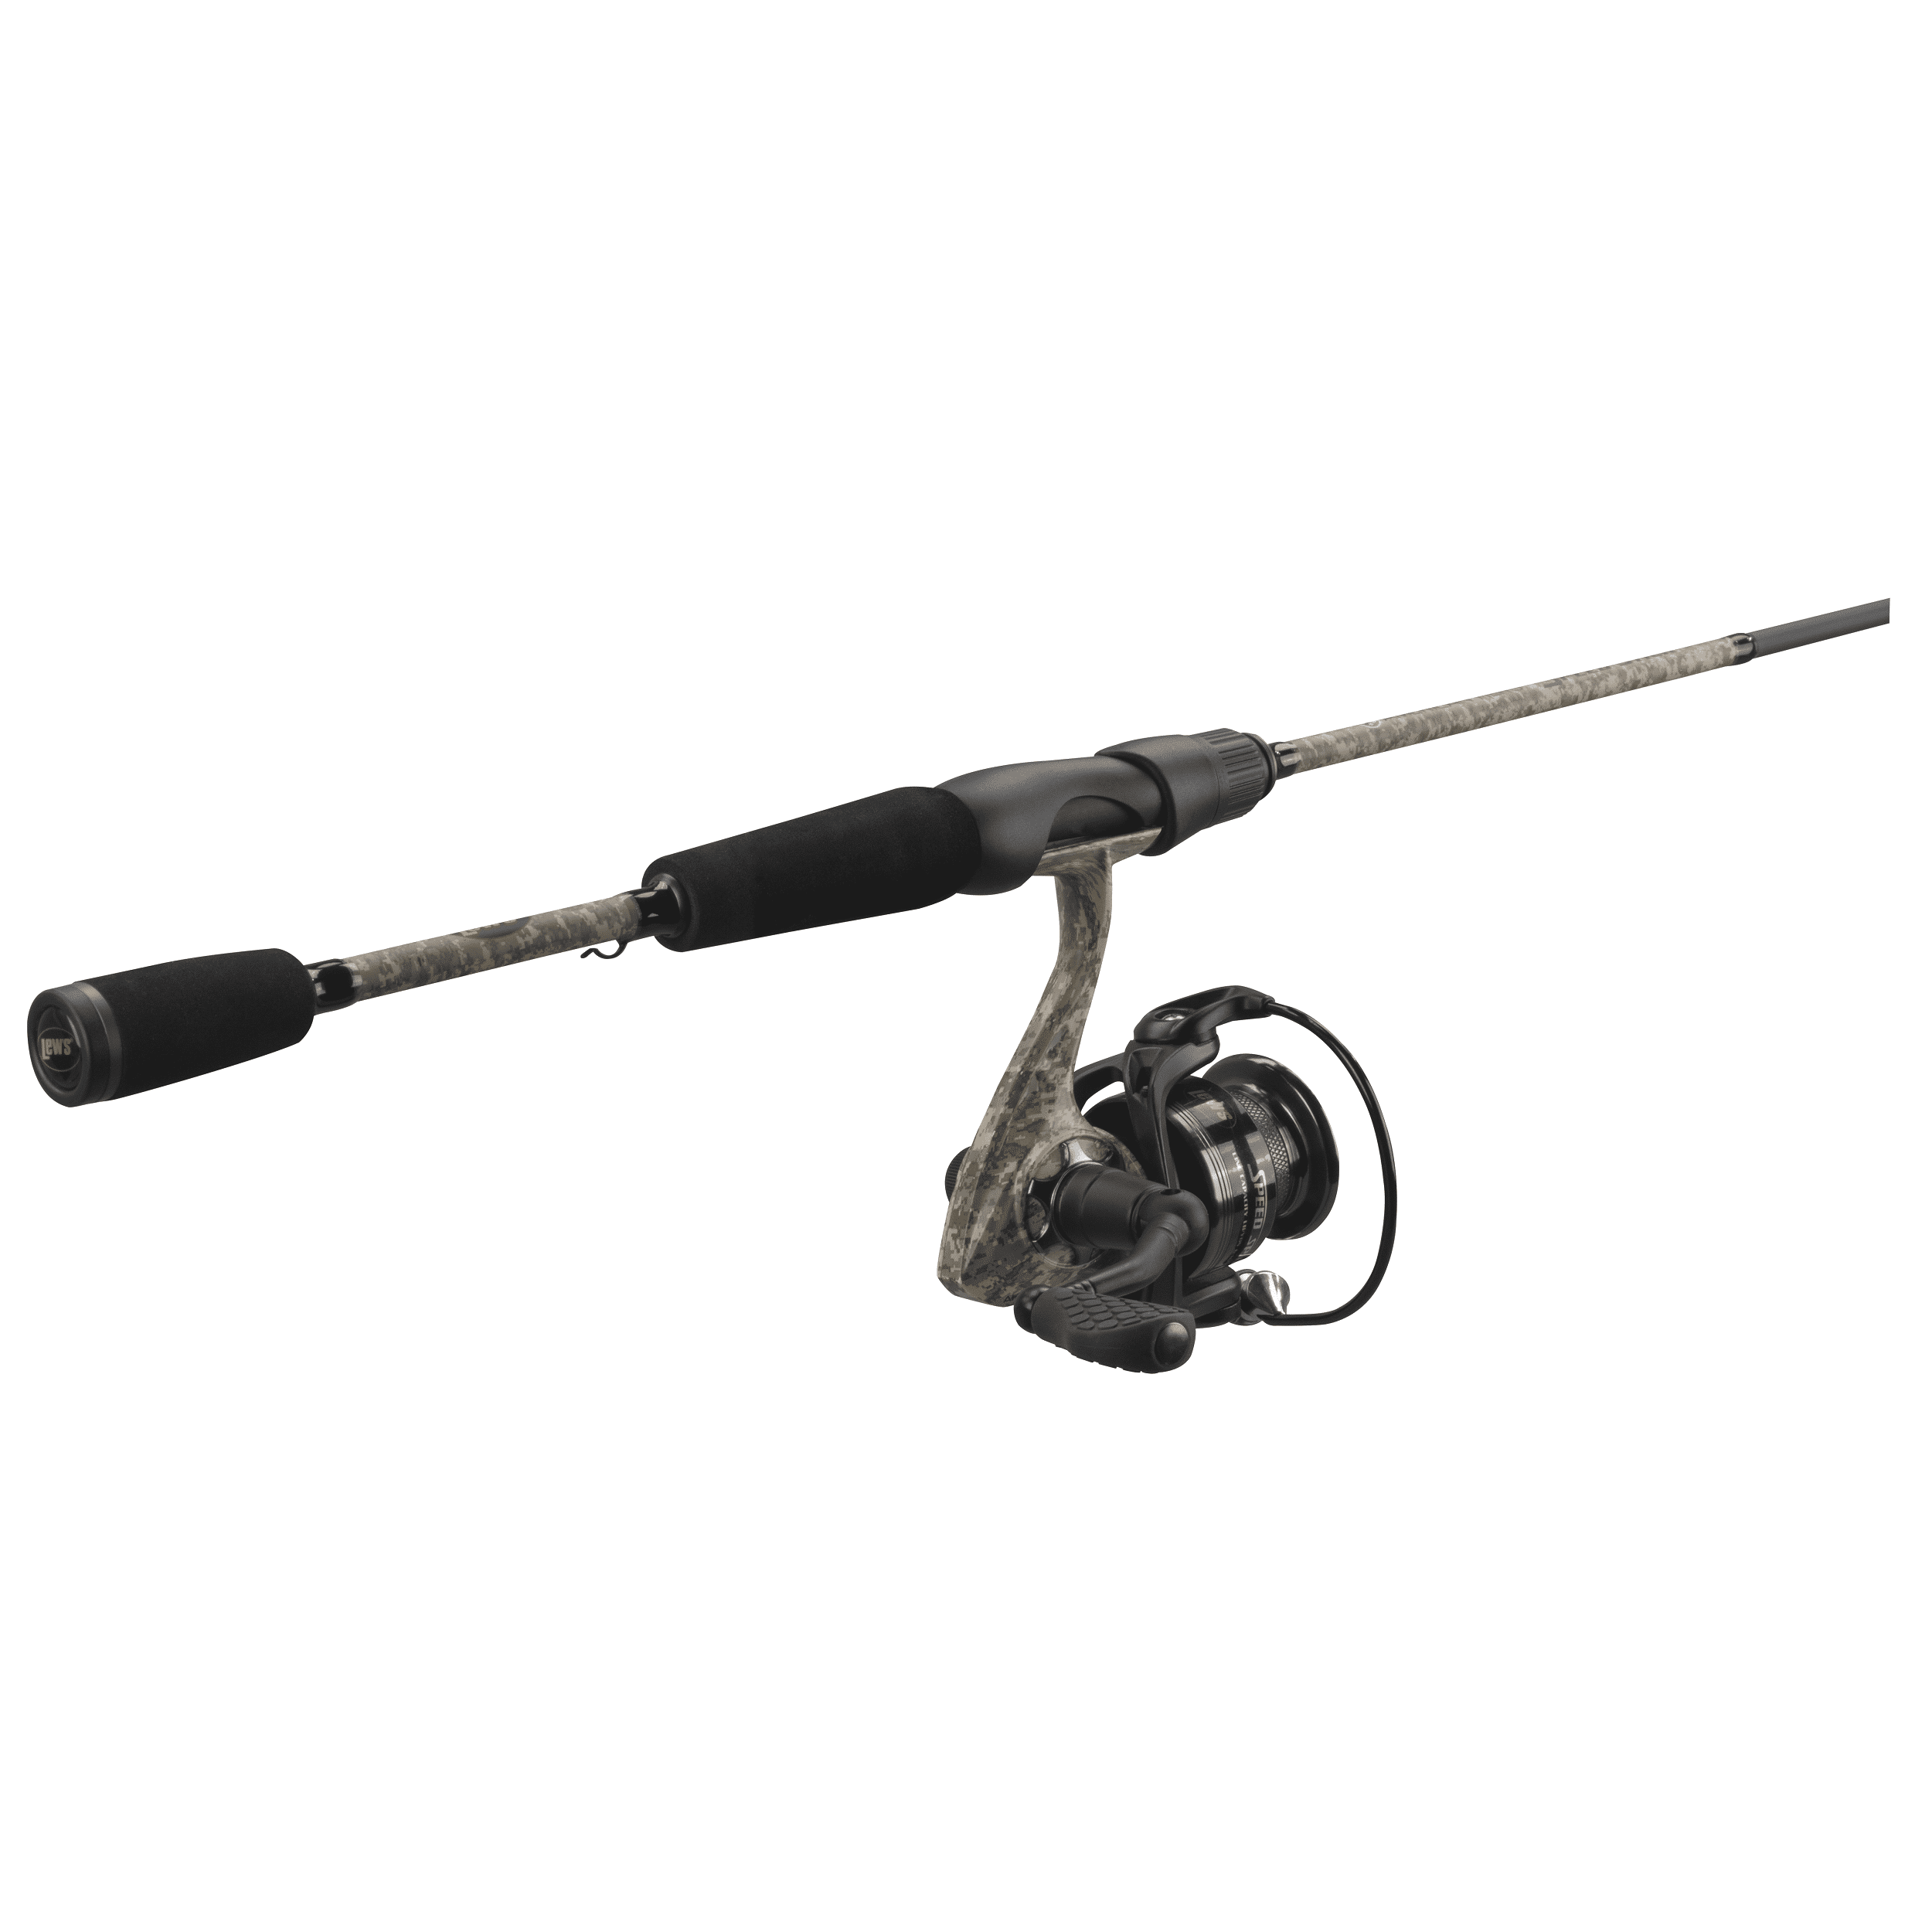 Lew's American Hero Camo 400 6.2:1 7'-2pc Med Spinning Combo IM7 